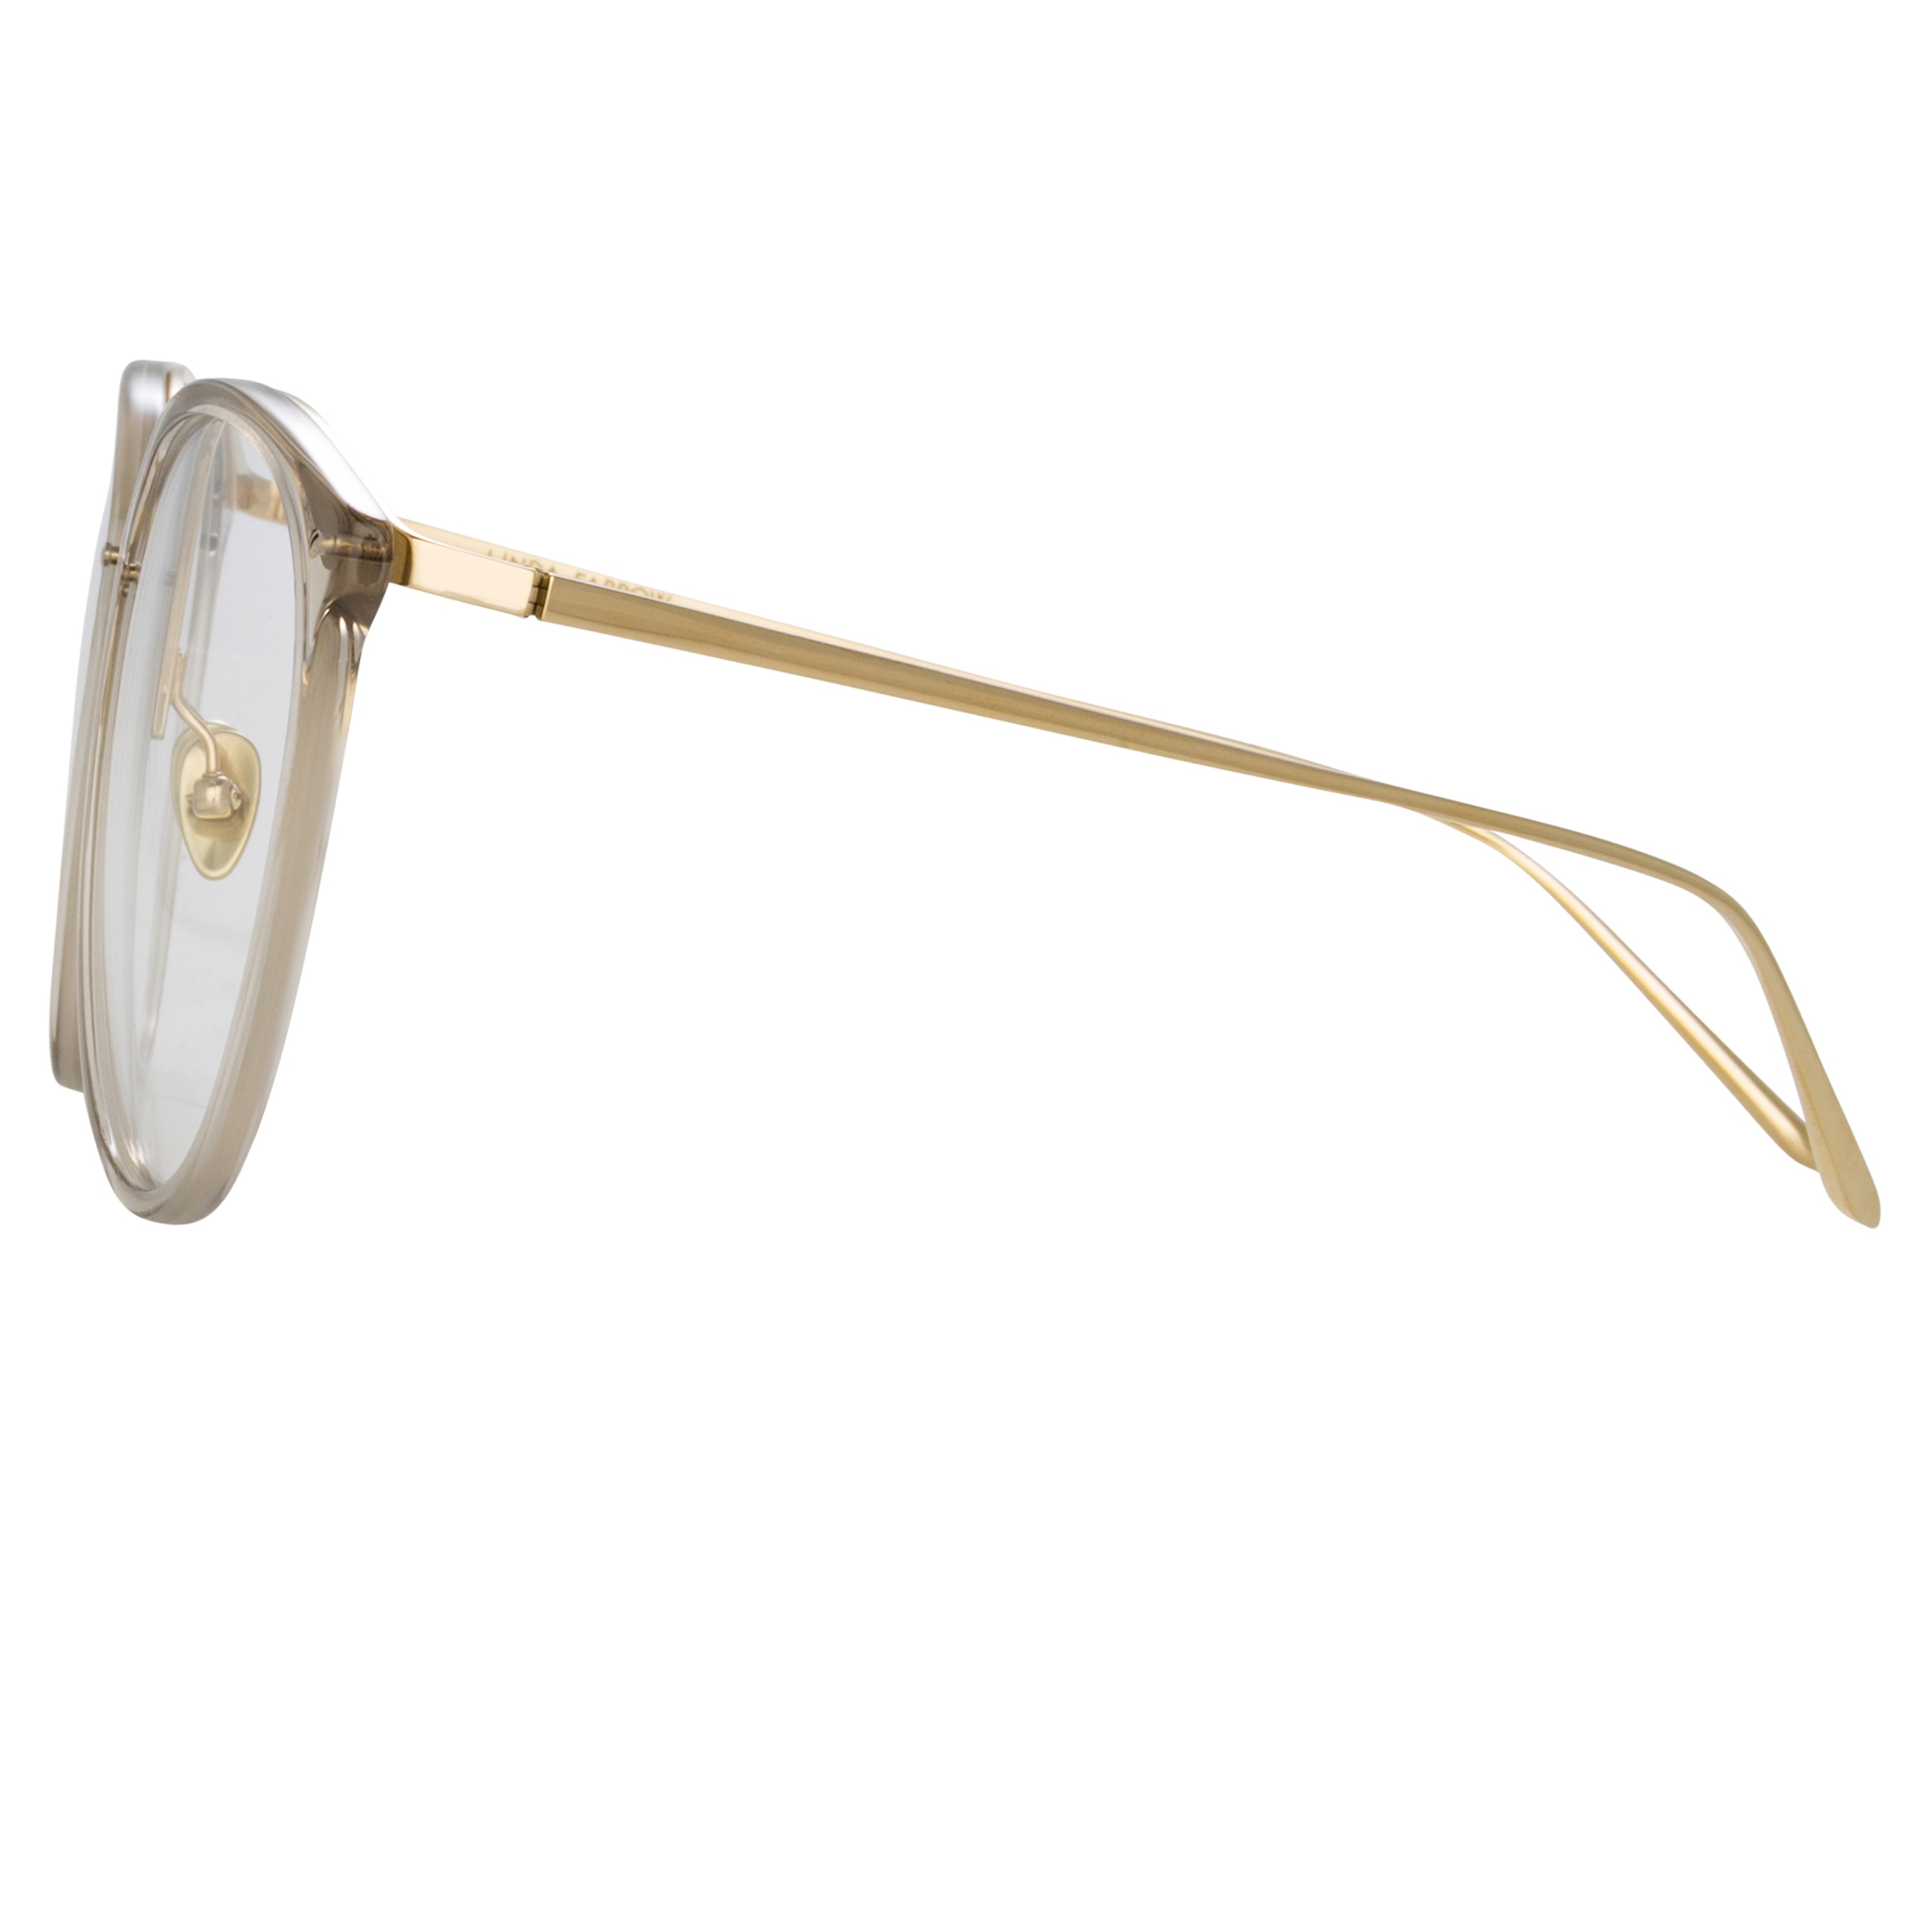 Color_LFL747C25OPT - Kings Oversized Optical Frame in Truffle